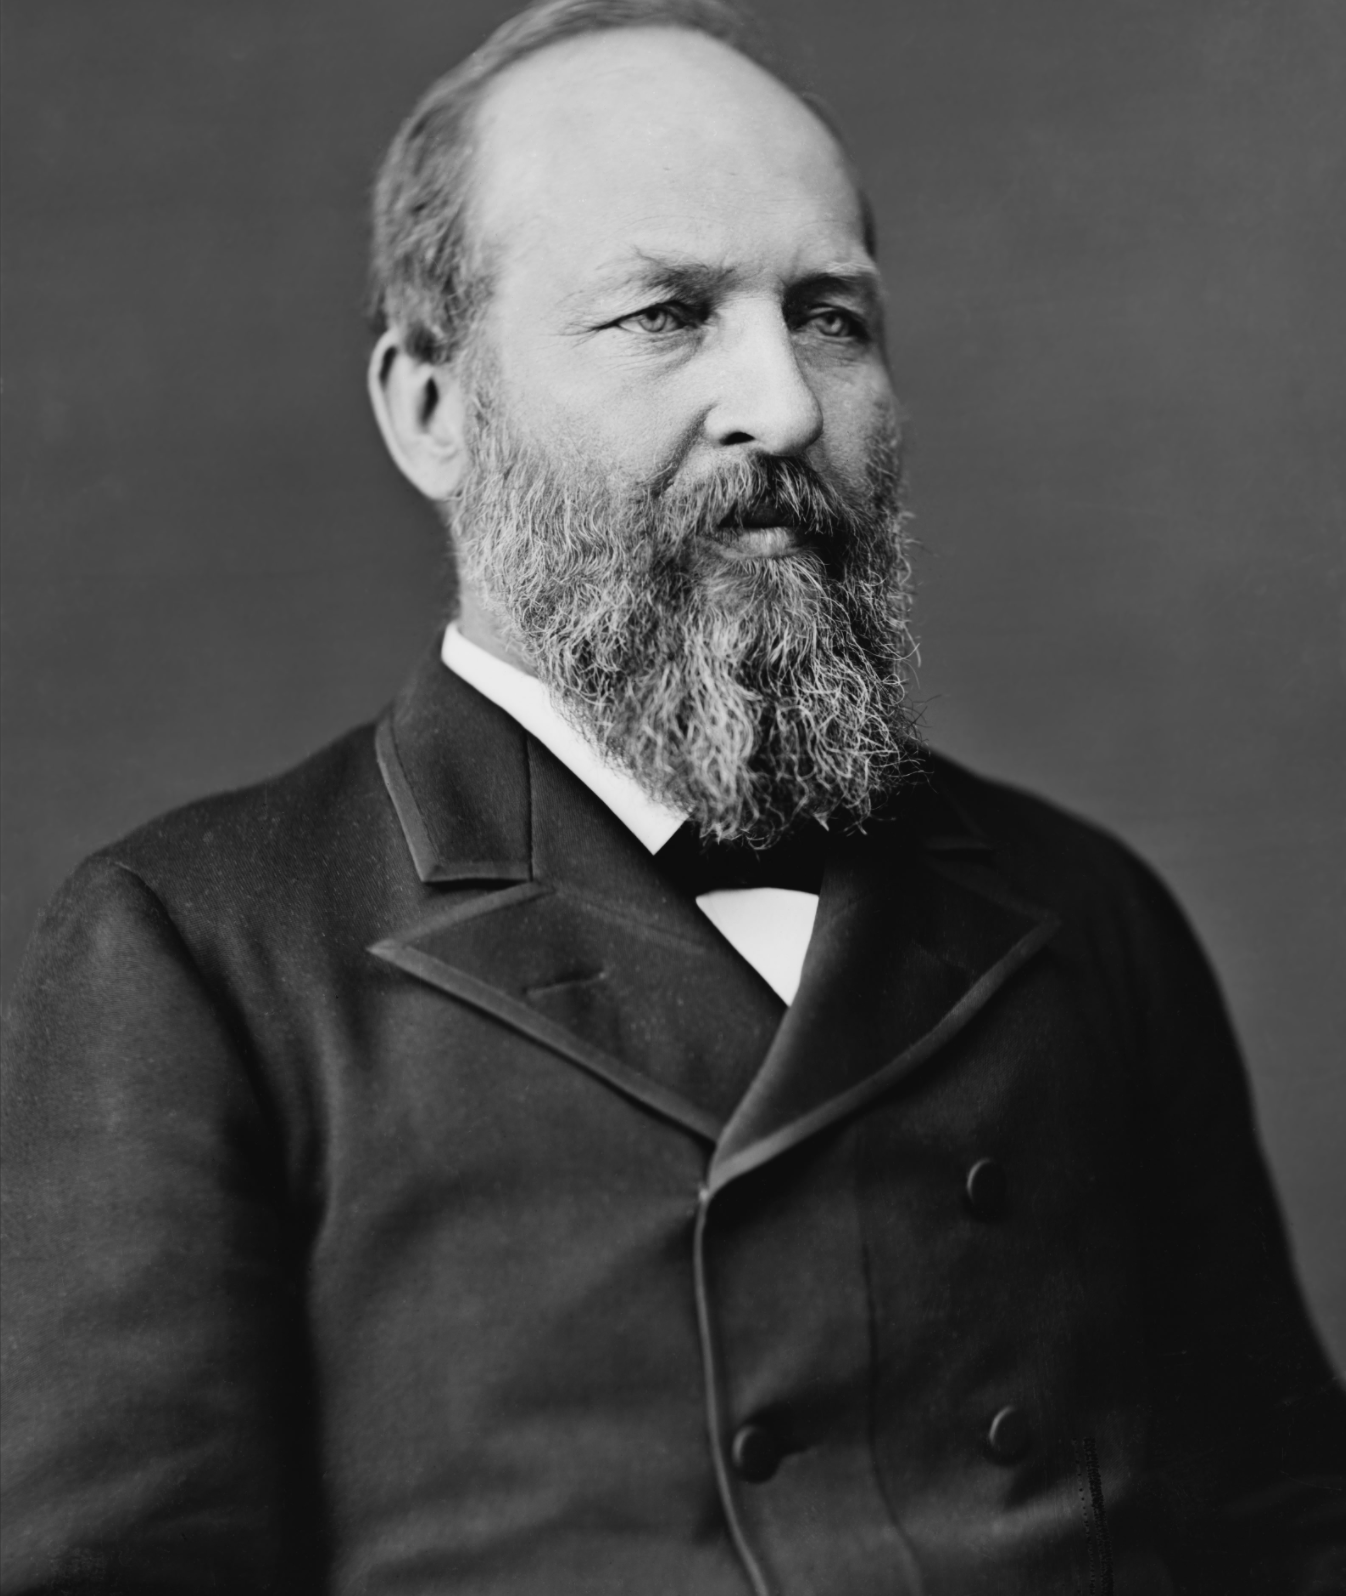 <p>James Garfield is not one of the better-known presidents, but he was likely the poorest.</p><p>Garfield was born in a log cabin, and his family, already of little means, fell into poverty upon the death of his father when he was still a toddler.</p><p>Garfield worked many jobs to pay the bills and put himself through college, most notably as a janitor and a carpenter. Despite earning a law degree and passing the Ohio bar exam, Garfield spent his life in public service and never earned much money.</p><p>In fact, he was essentially penniless when he was assassinated in 1881.</p>